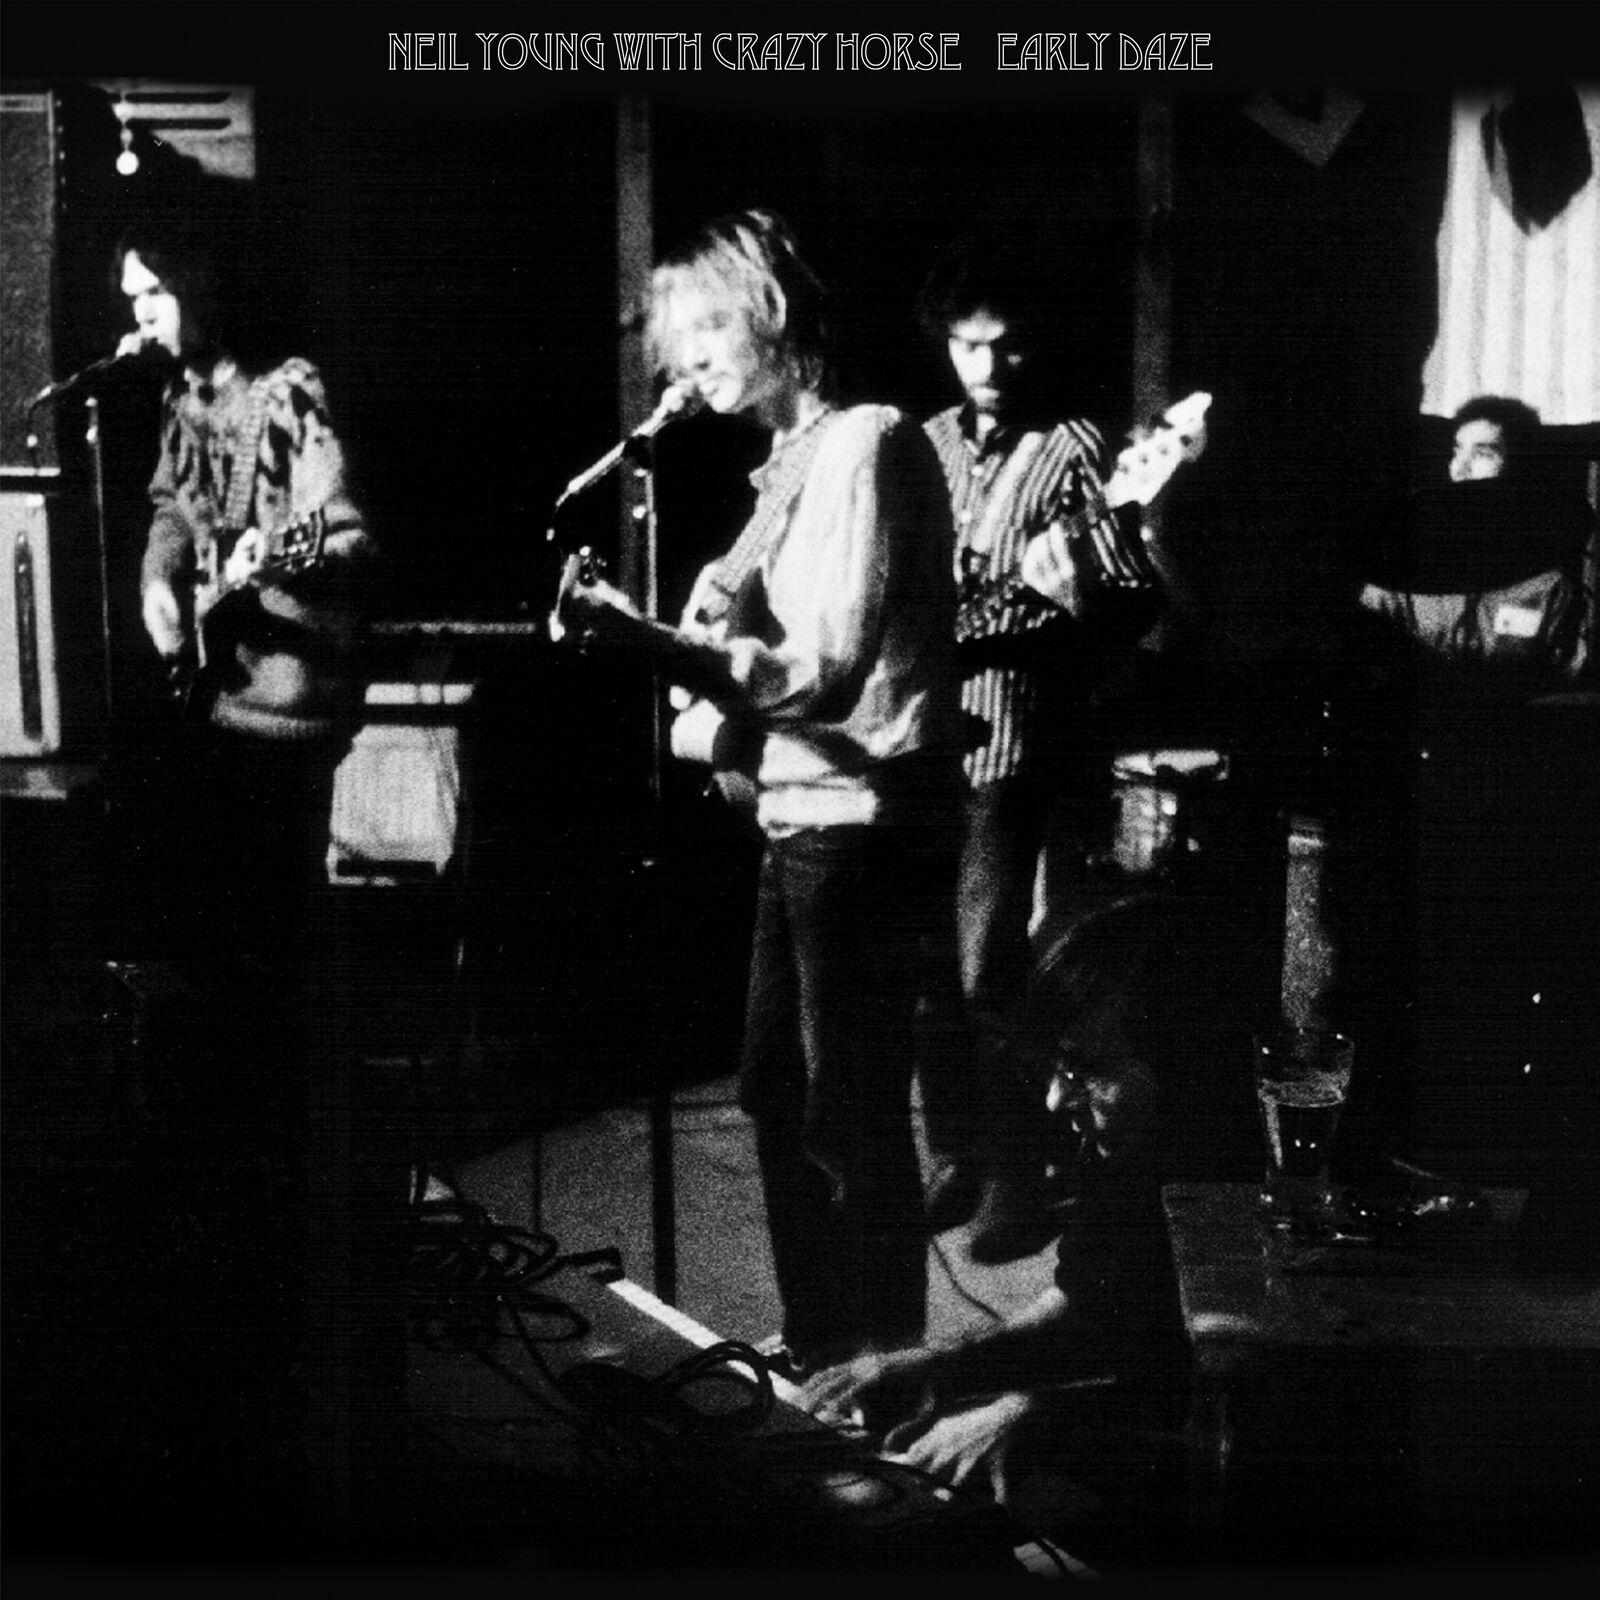 Neil Young with Crazy Horse EARLY DAZE (Vinyl) 12